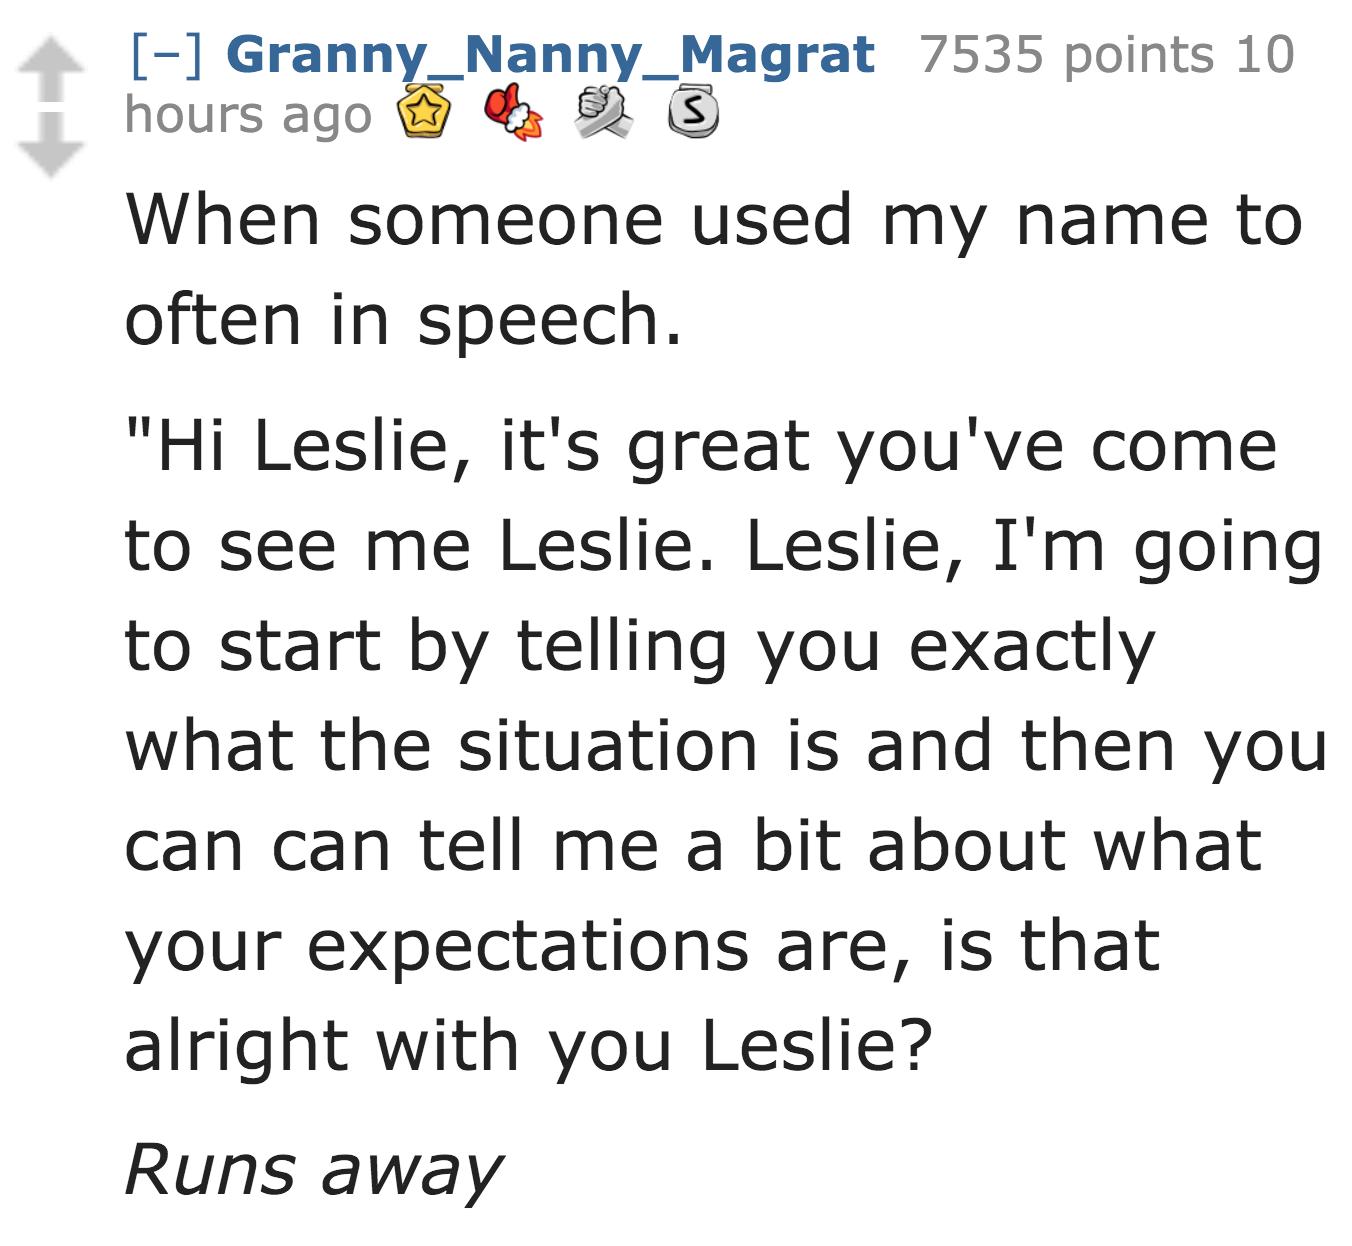 angle - Granny_Nanny_Magrat 7535 points 10 S hours ago When someone used my name to often in speech. "Hi Leslie, it's great you've come to see me Leslie. Leslie, I'm going to start by telling you exactly what the situation is and then you can can tell me 